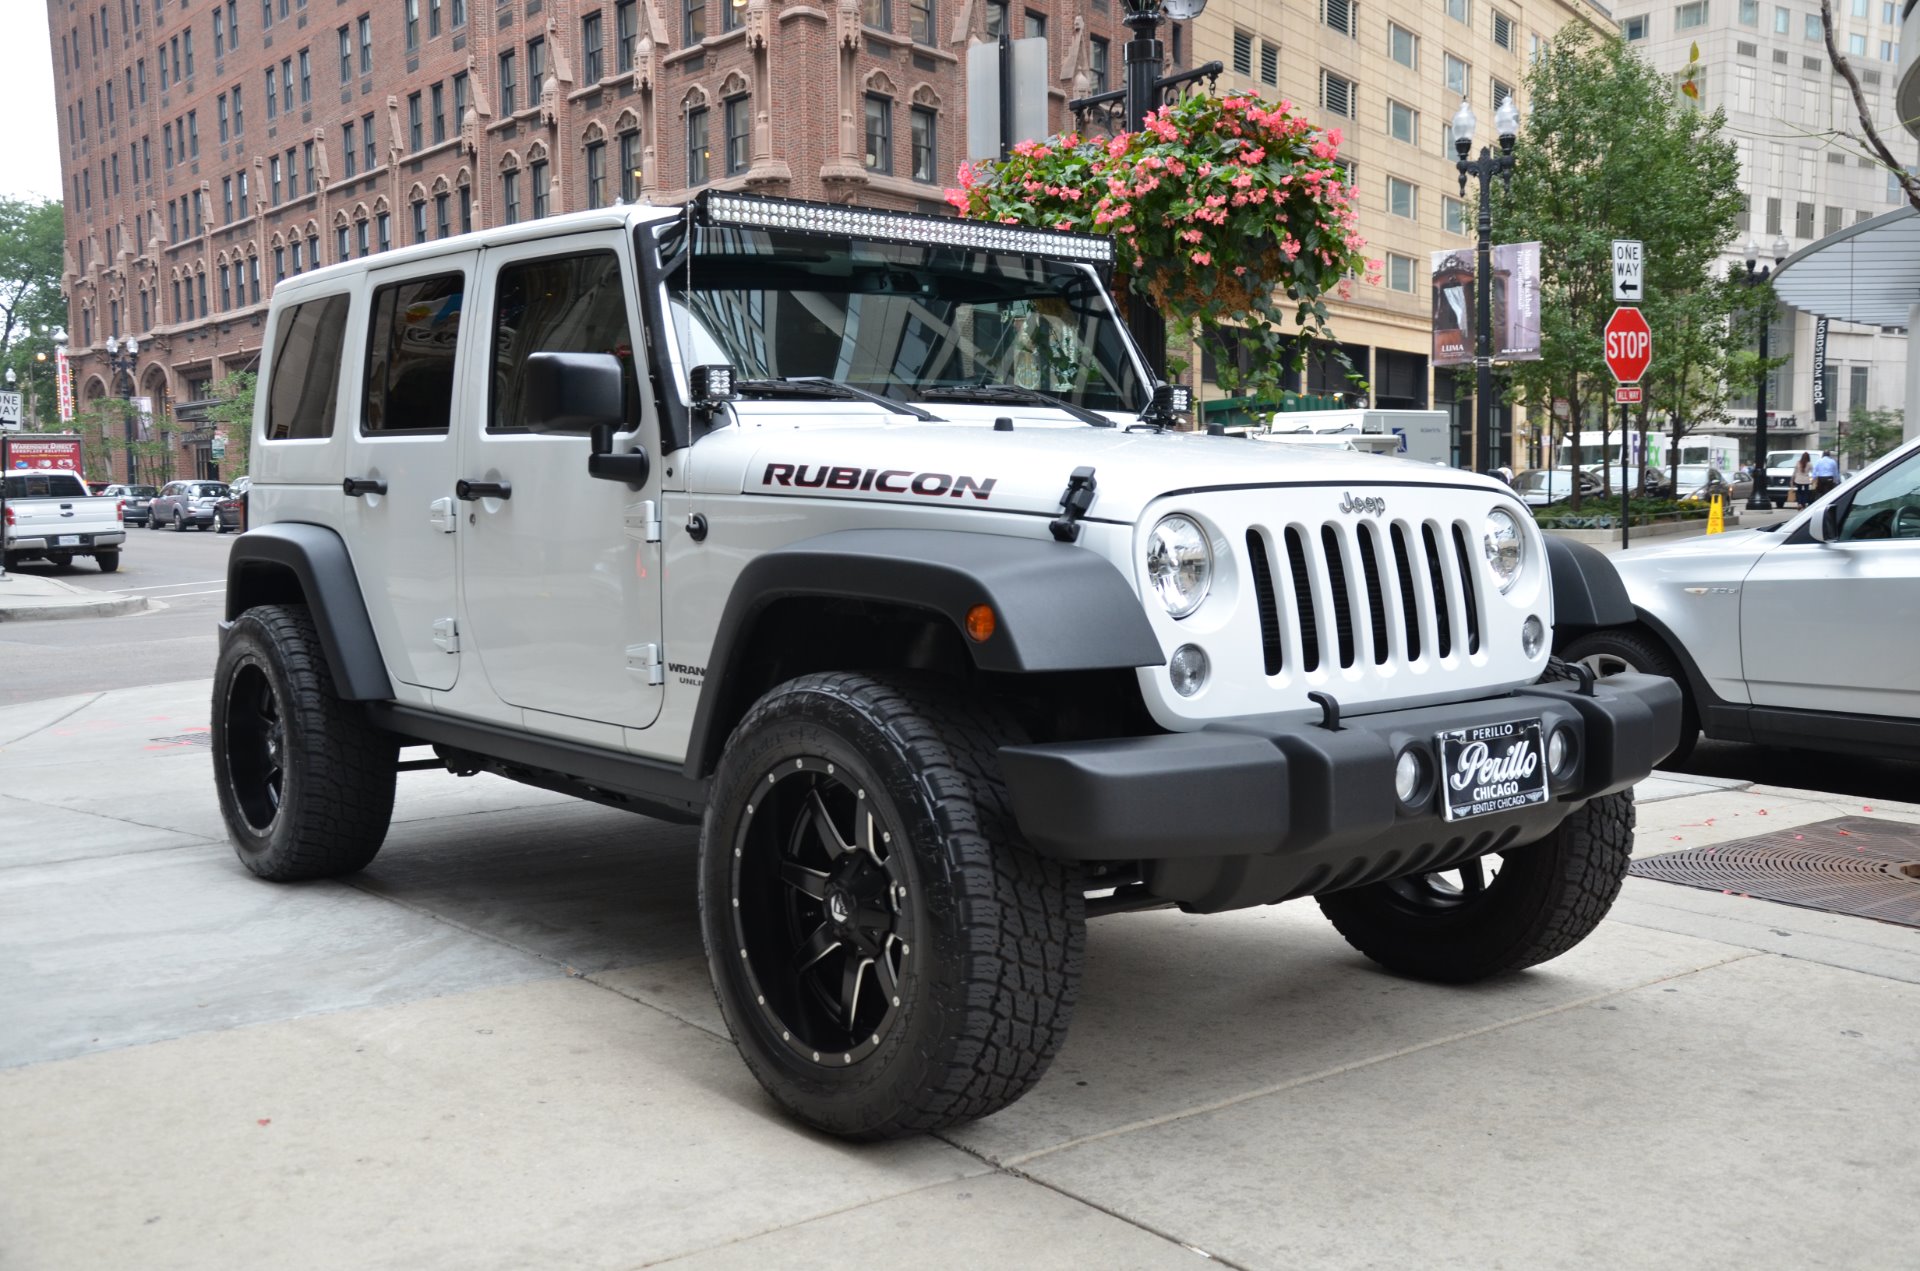 2016 Jeep Wrangler Unlimited Rubicon Stock # GC-CHARLIE02 for sale near  Chicago, IL | IL Jeep Dealer